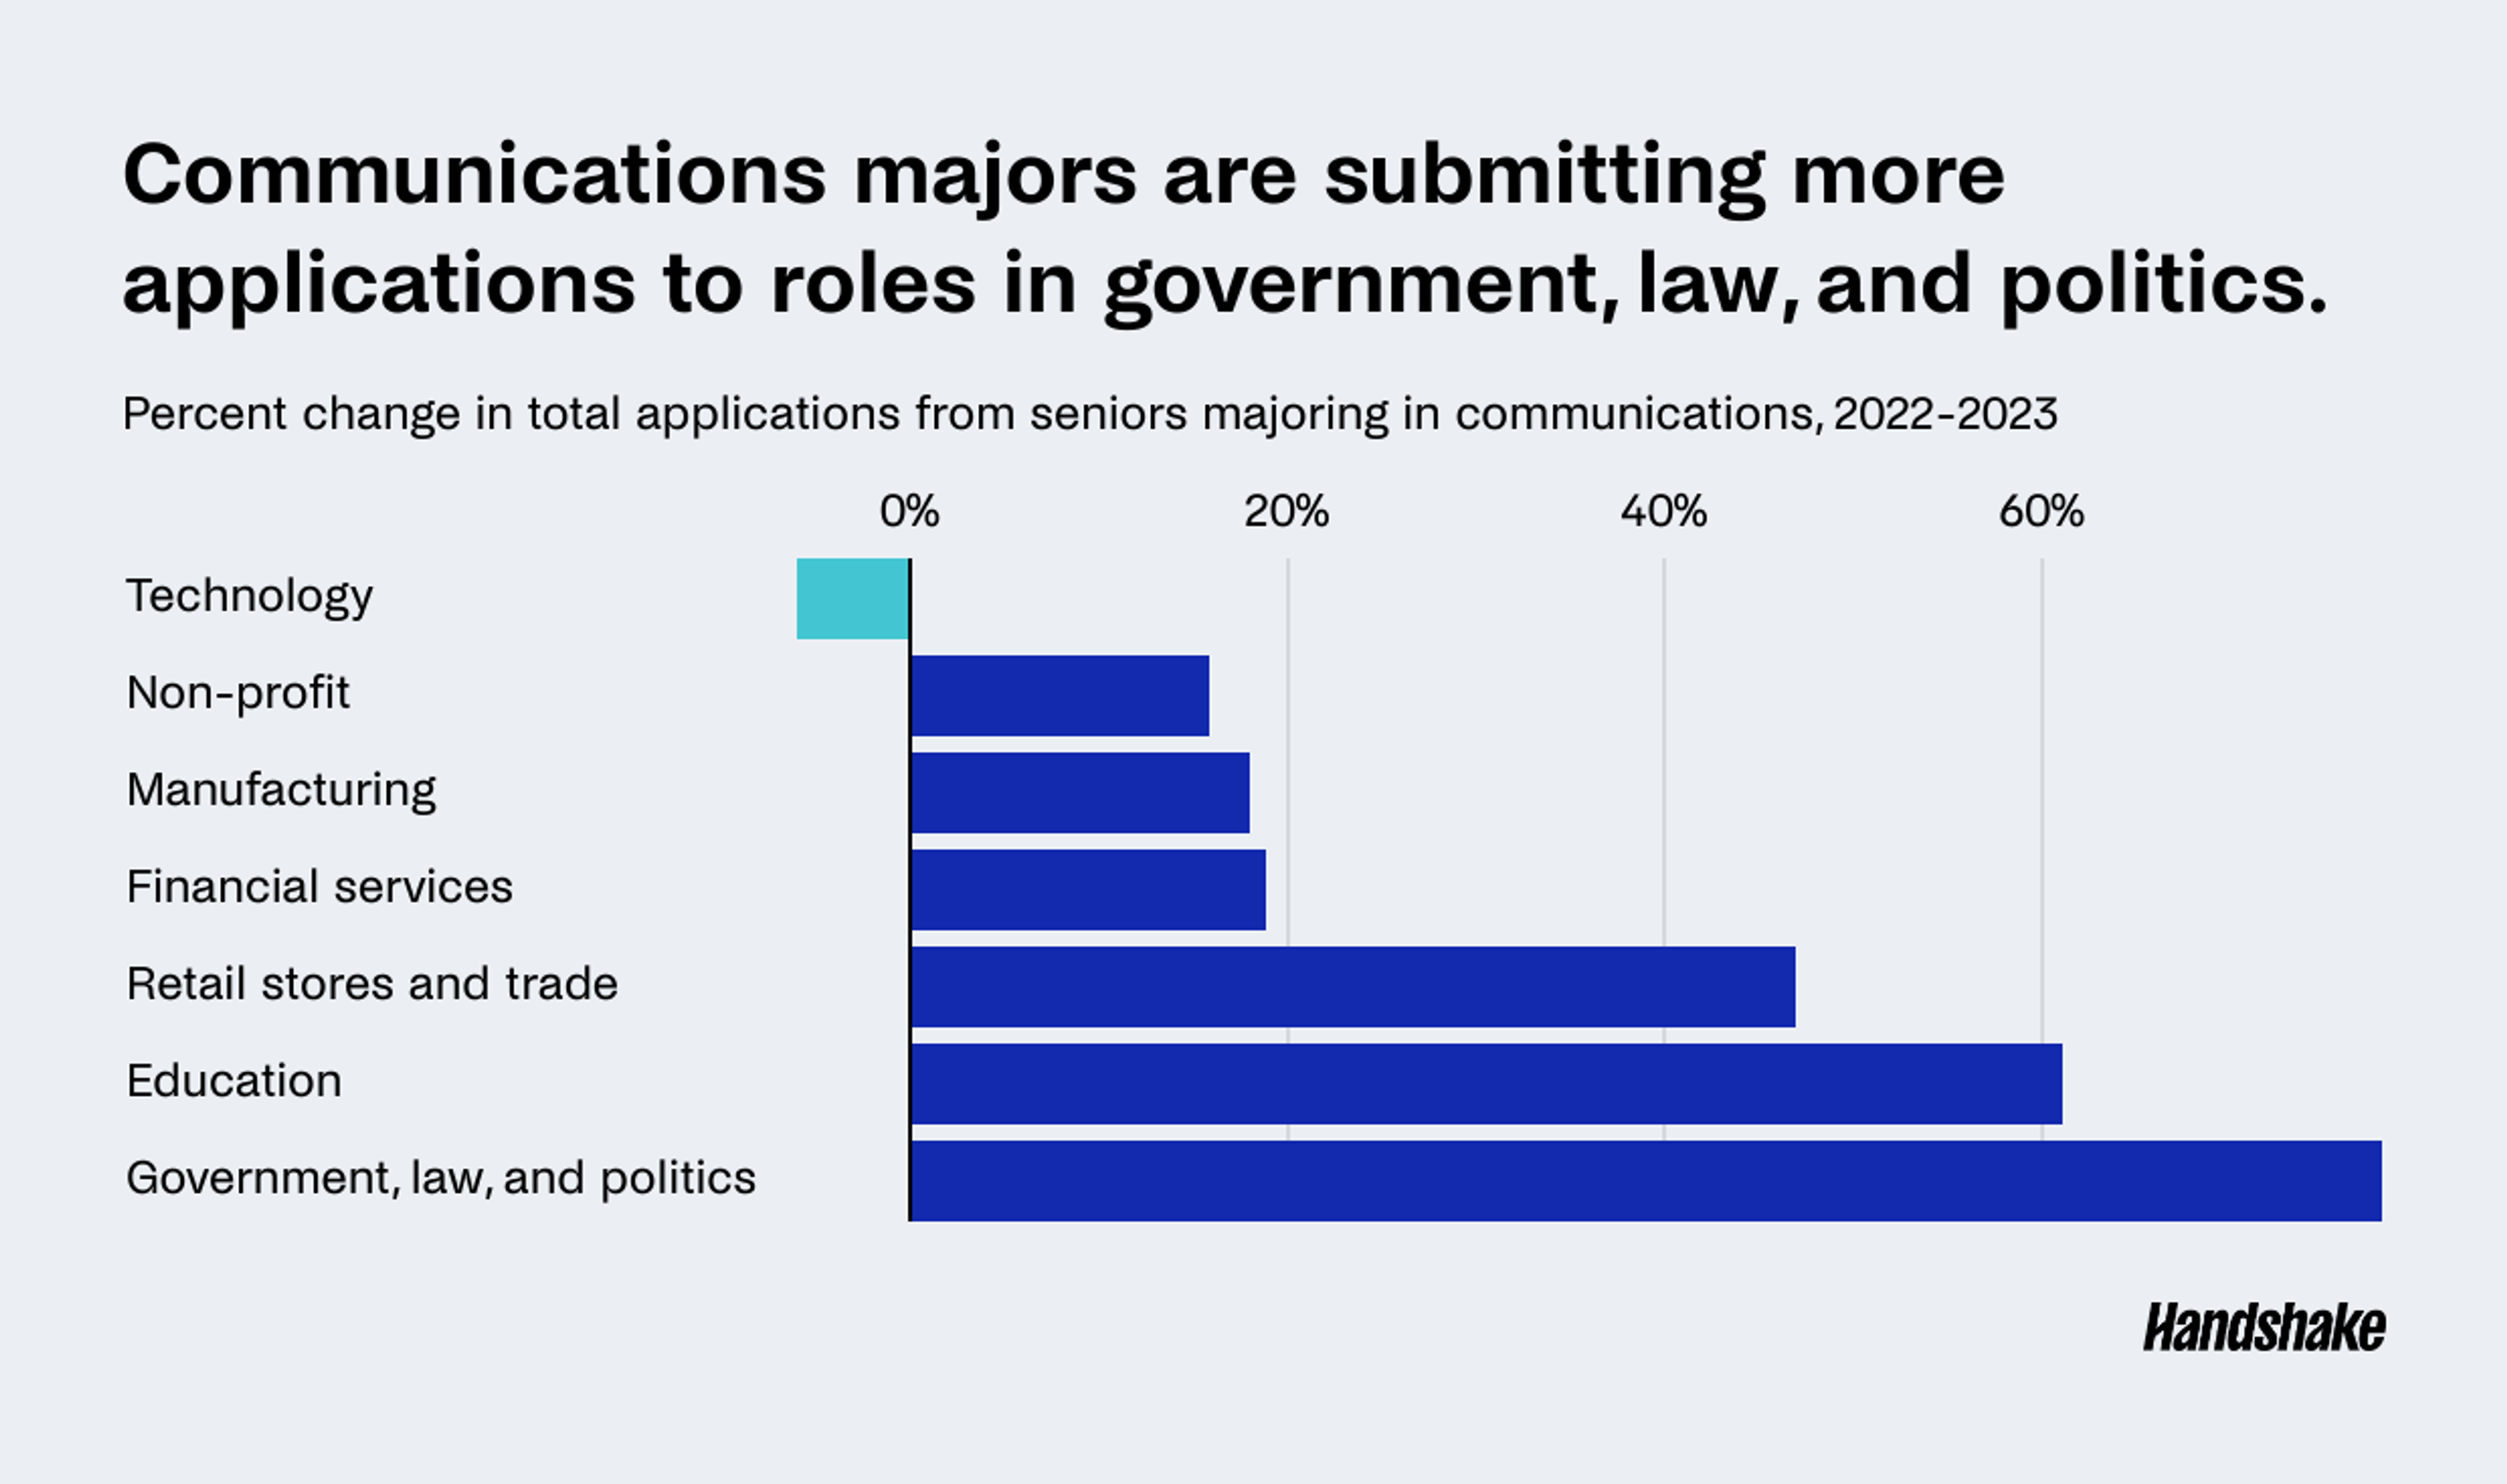 Bar chart showing change in applications to roles in various industries from communications majors in 2022 vs. 2023. Applications to technology are down, while applications to nonprofit, manufacturing, financial services, retail, education, and government are up.